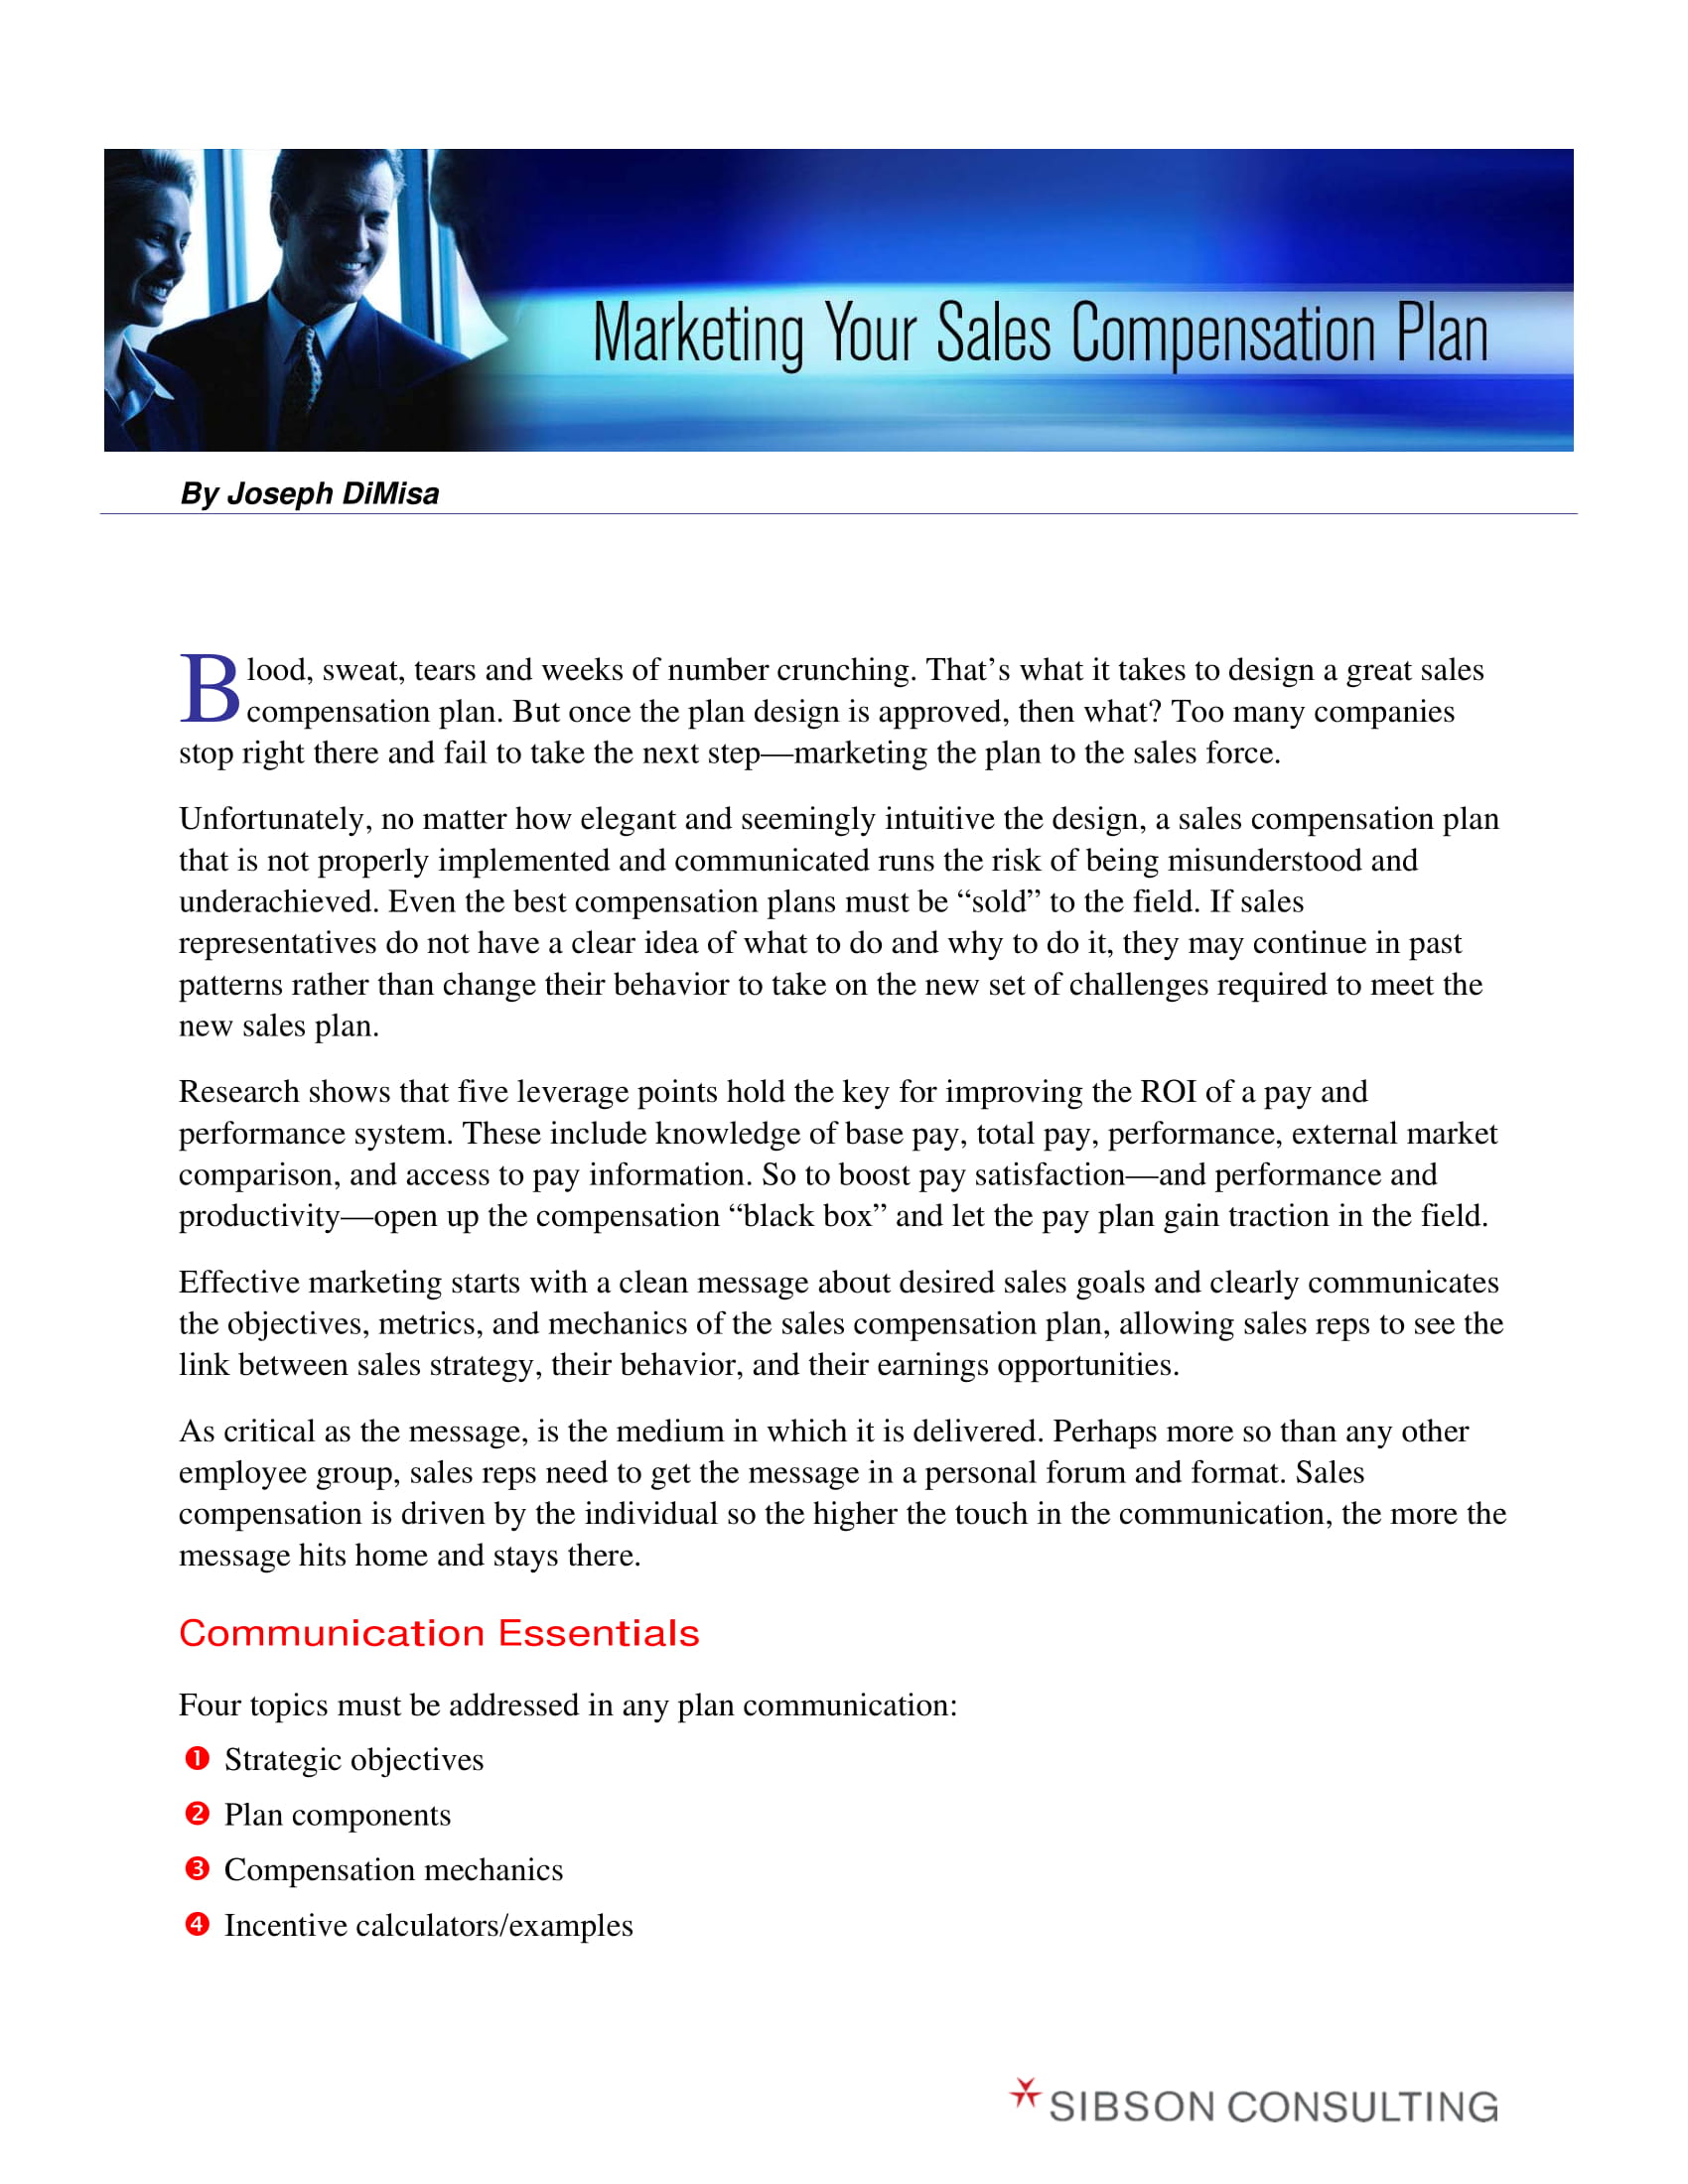 Sales Compensation Plan Marketing Layout Example 1